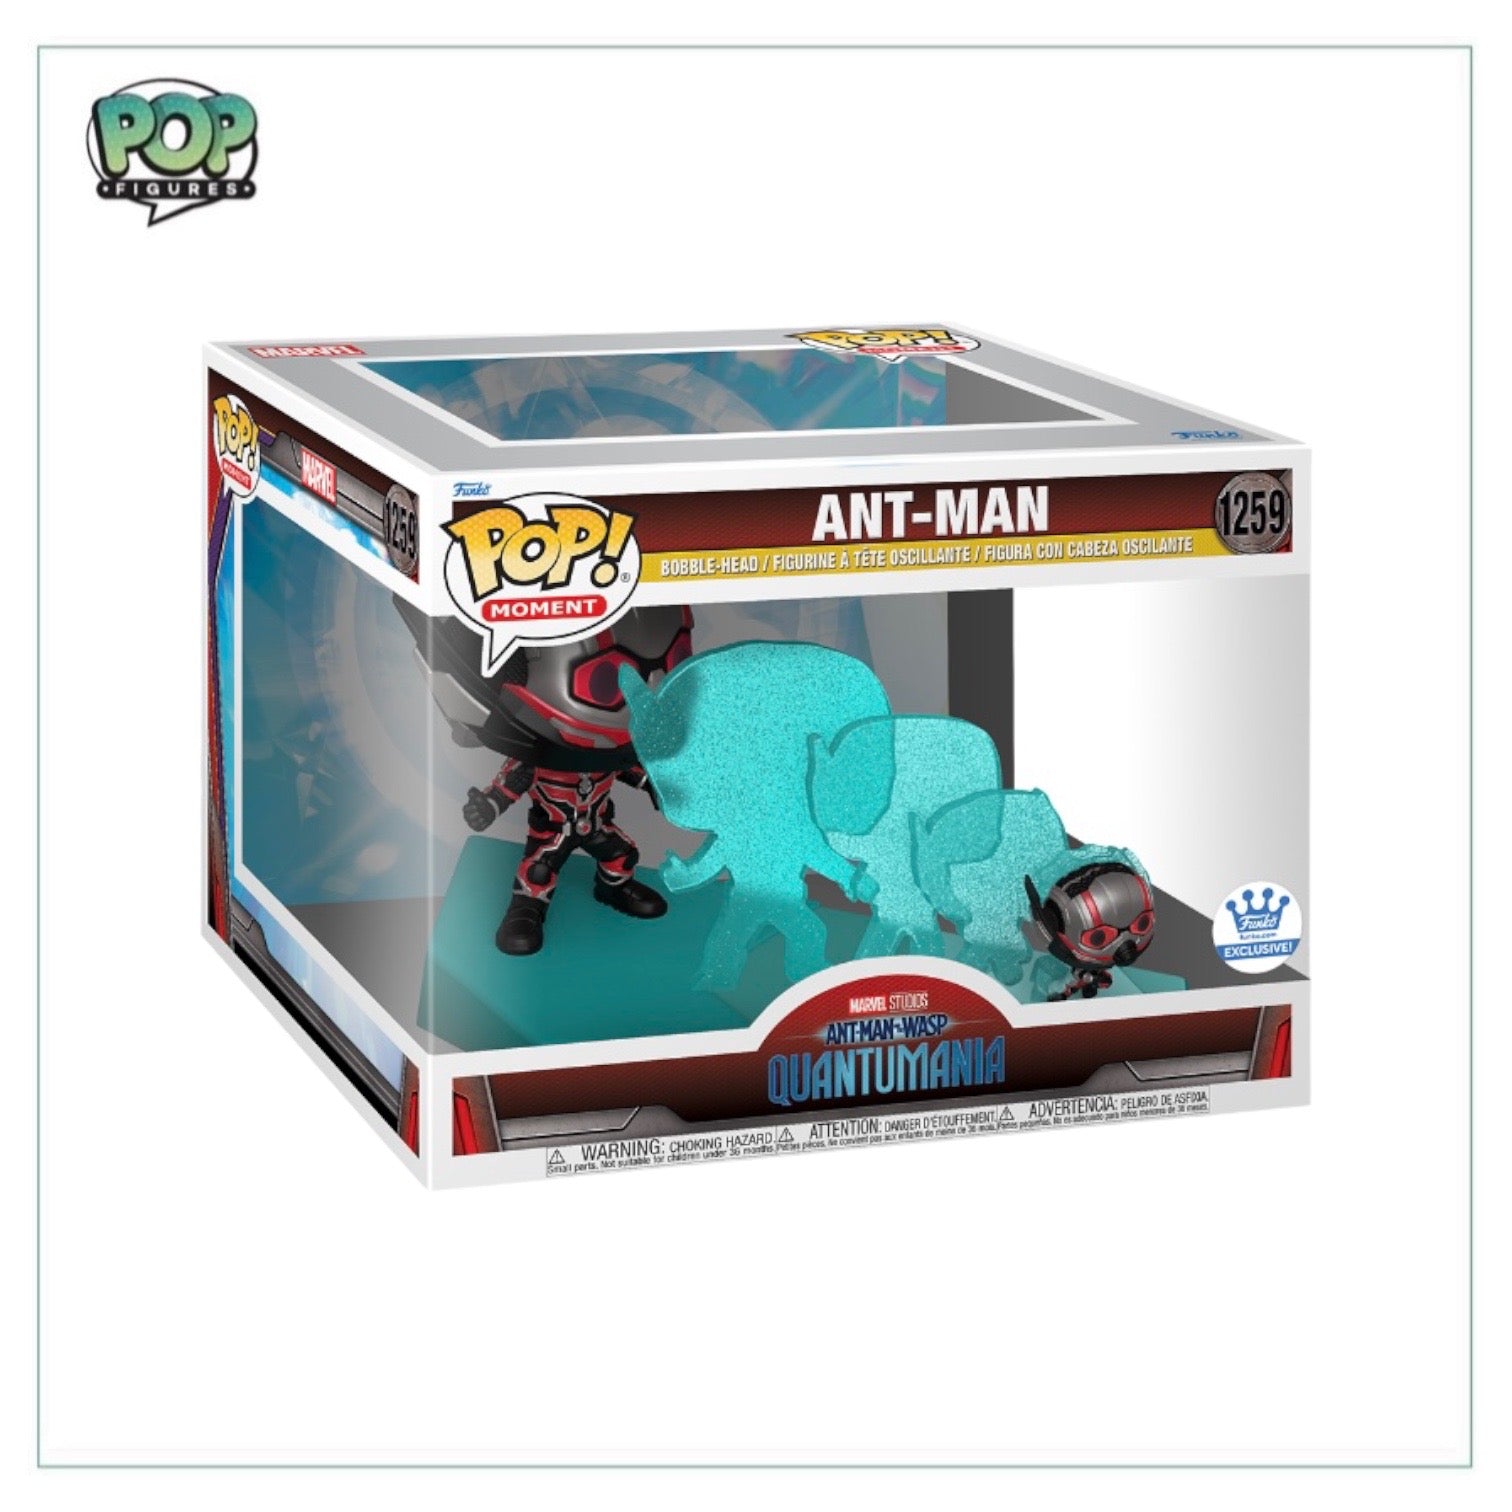 Ant-Man #1259 Funko Pop Moment! - Ant-Man and the Wasp Quantumania - Funko Shop Exclusive